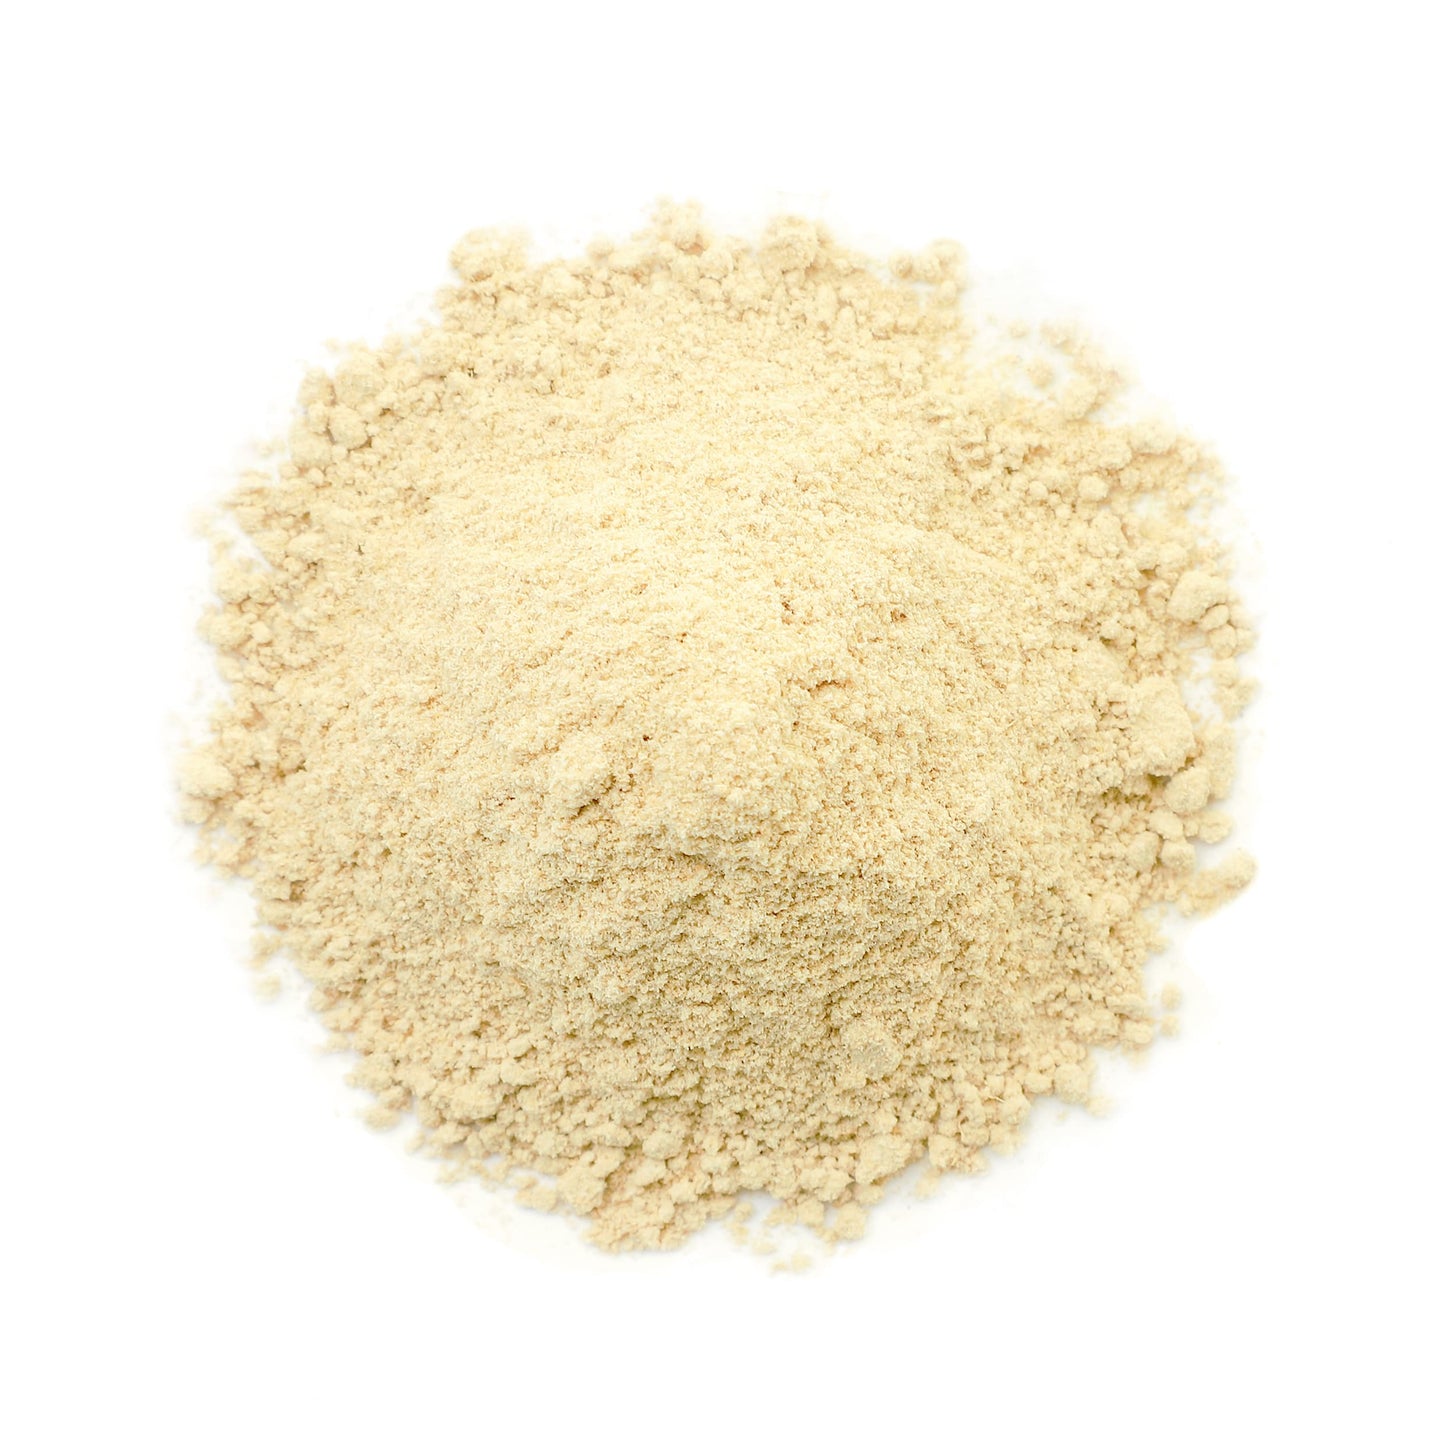 Carrot Powder - Ground Raw Dried Roots, Vegan, Bulk, Great for Baking, Juices, Smoothies, Shakes, and Instant Breakfast Drinks. Good Source of Dietary Fiber, Potassium, and Vitamin A